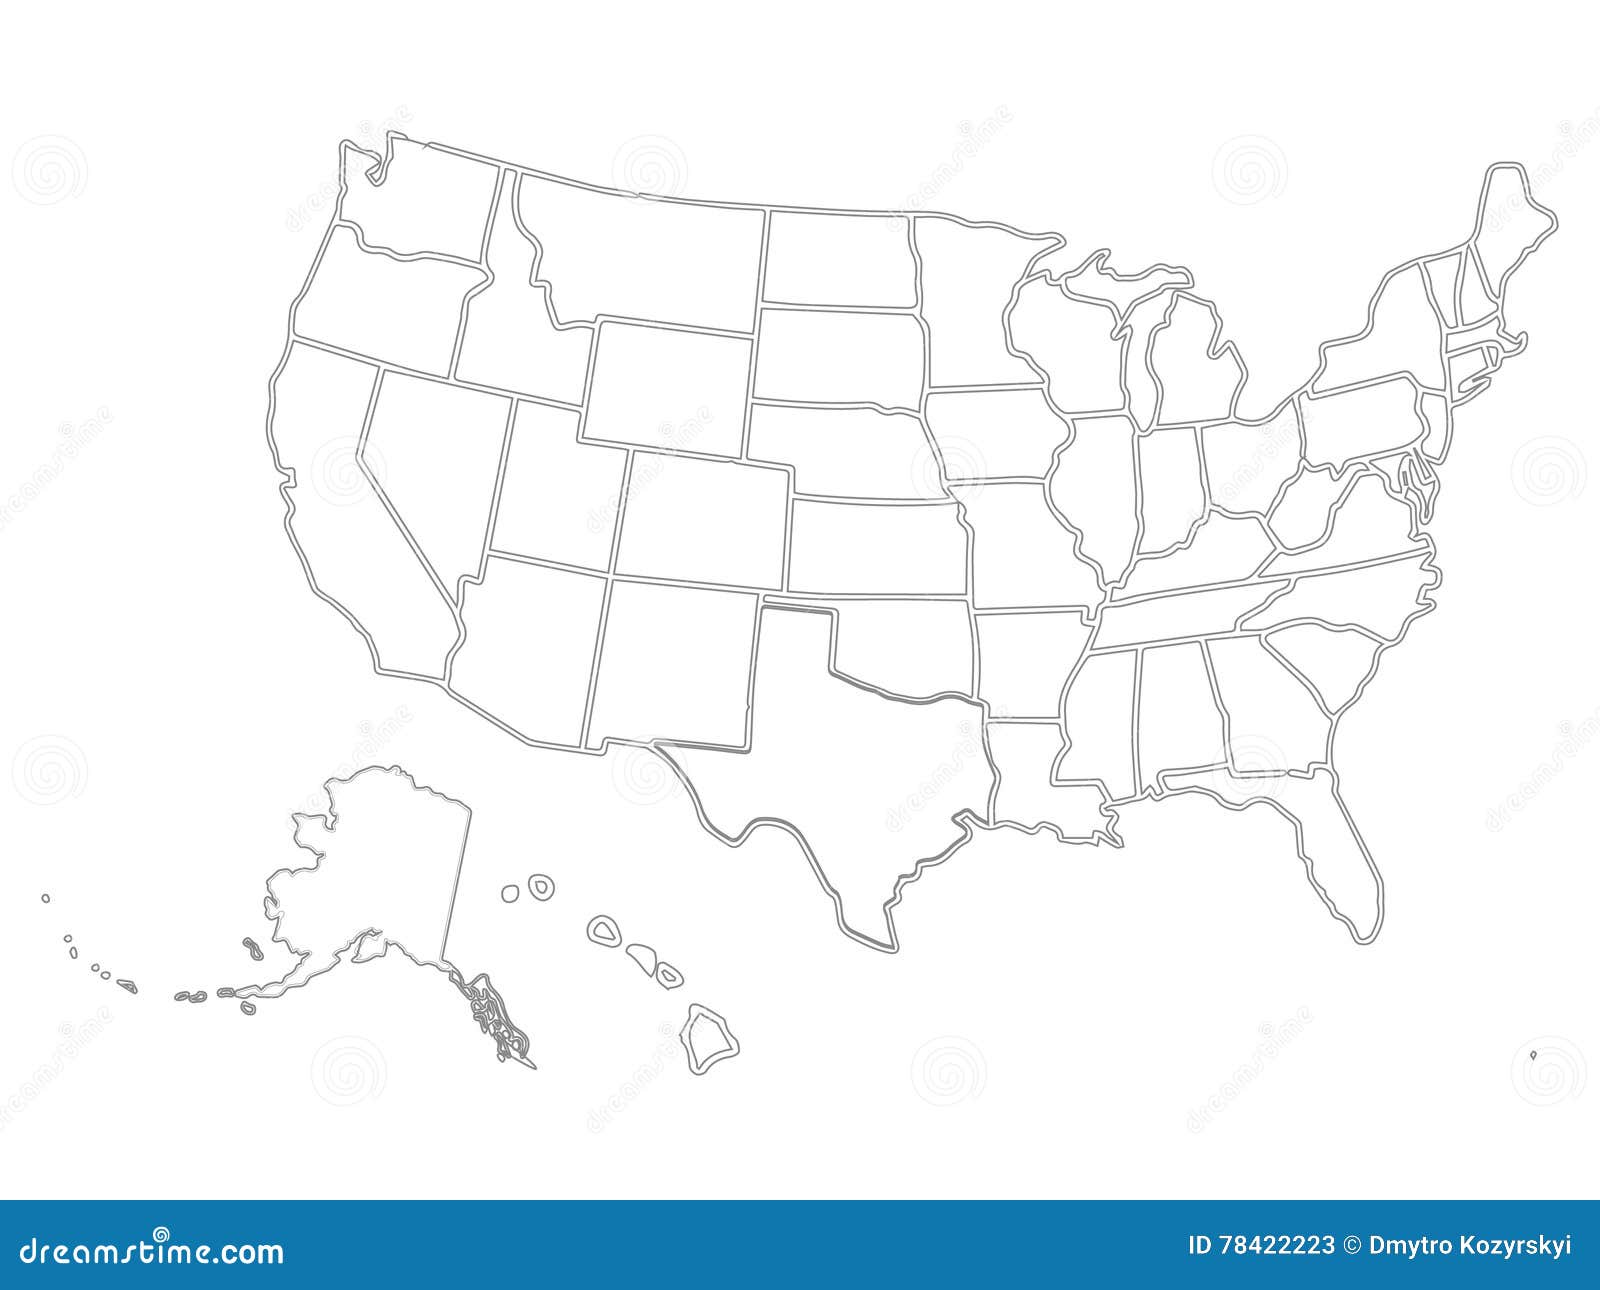 Blank Similar USA Map on White Background. United States of In Blank Template Of The United States